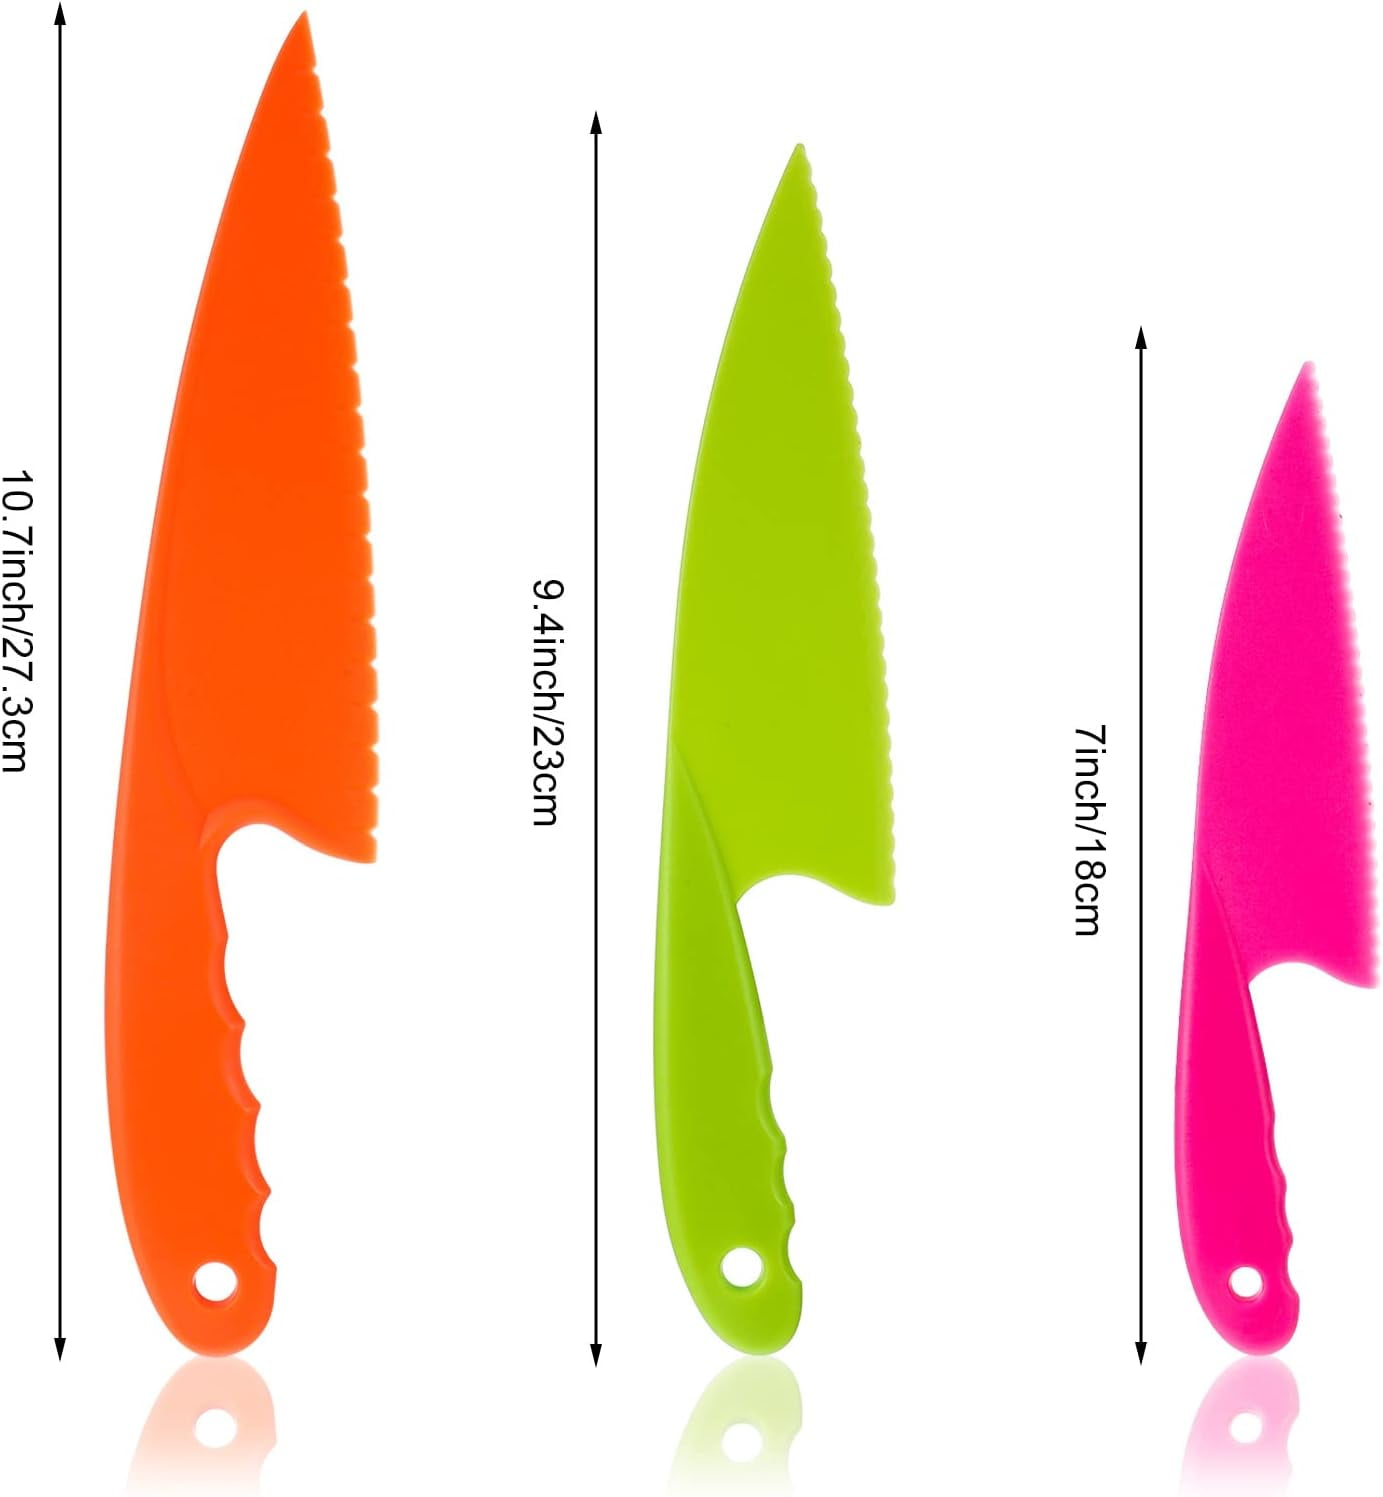 6 Pcs Kitchen Safety Knives for Kids, Children's Cooking Knives Firm Grip,  Serrated Edges for Vegetables, Fruits, Salad, Cake (Green Blue Yellow) 